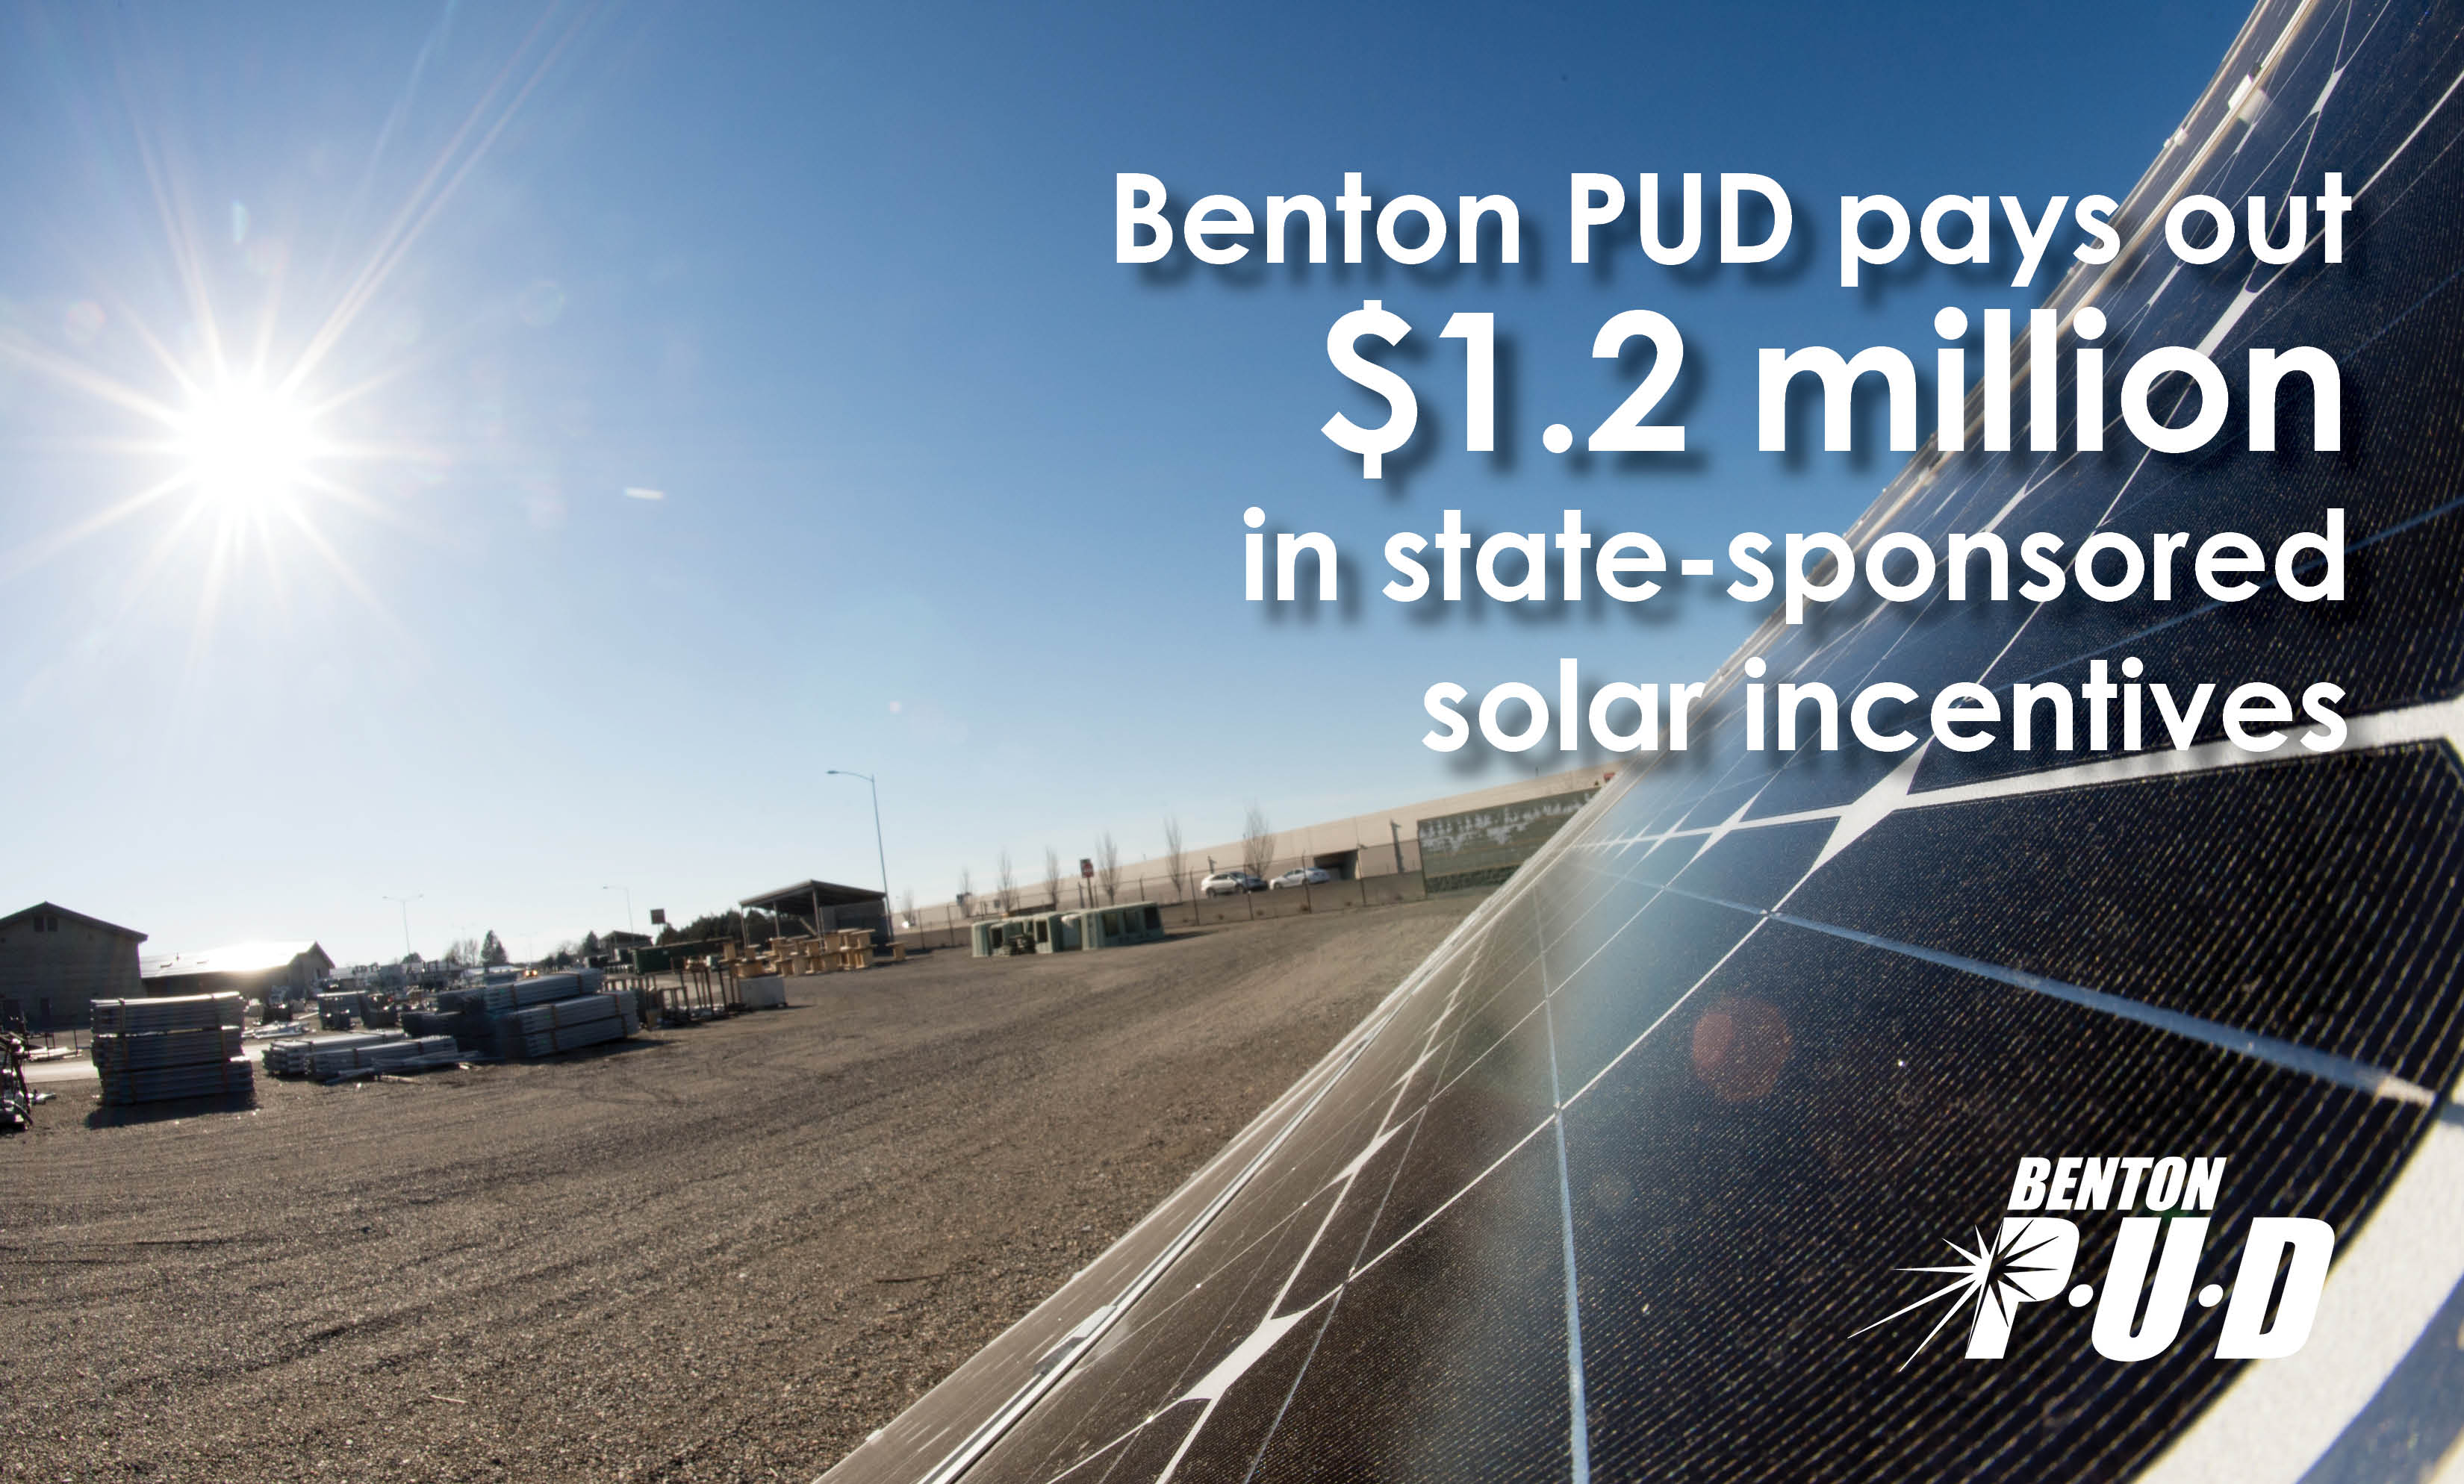 benton-pud-pays-out-1-2-million-in-state-sponsored-solar-incentives